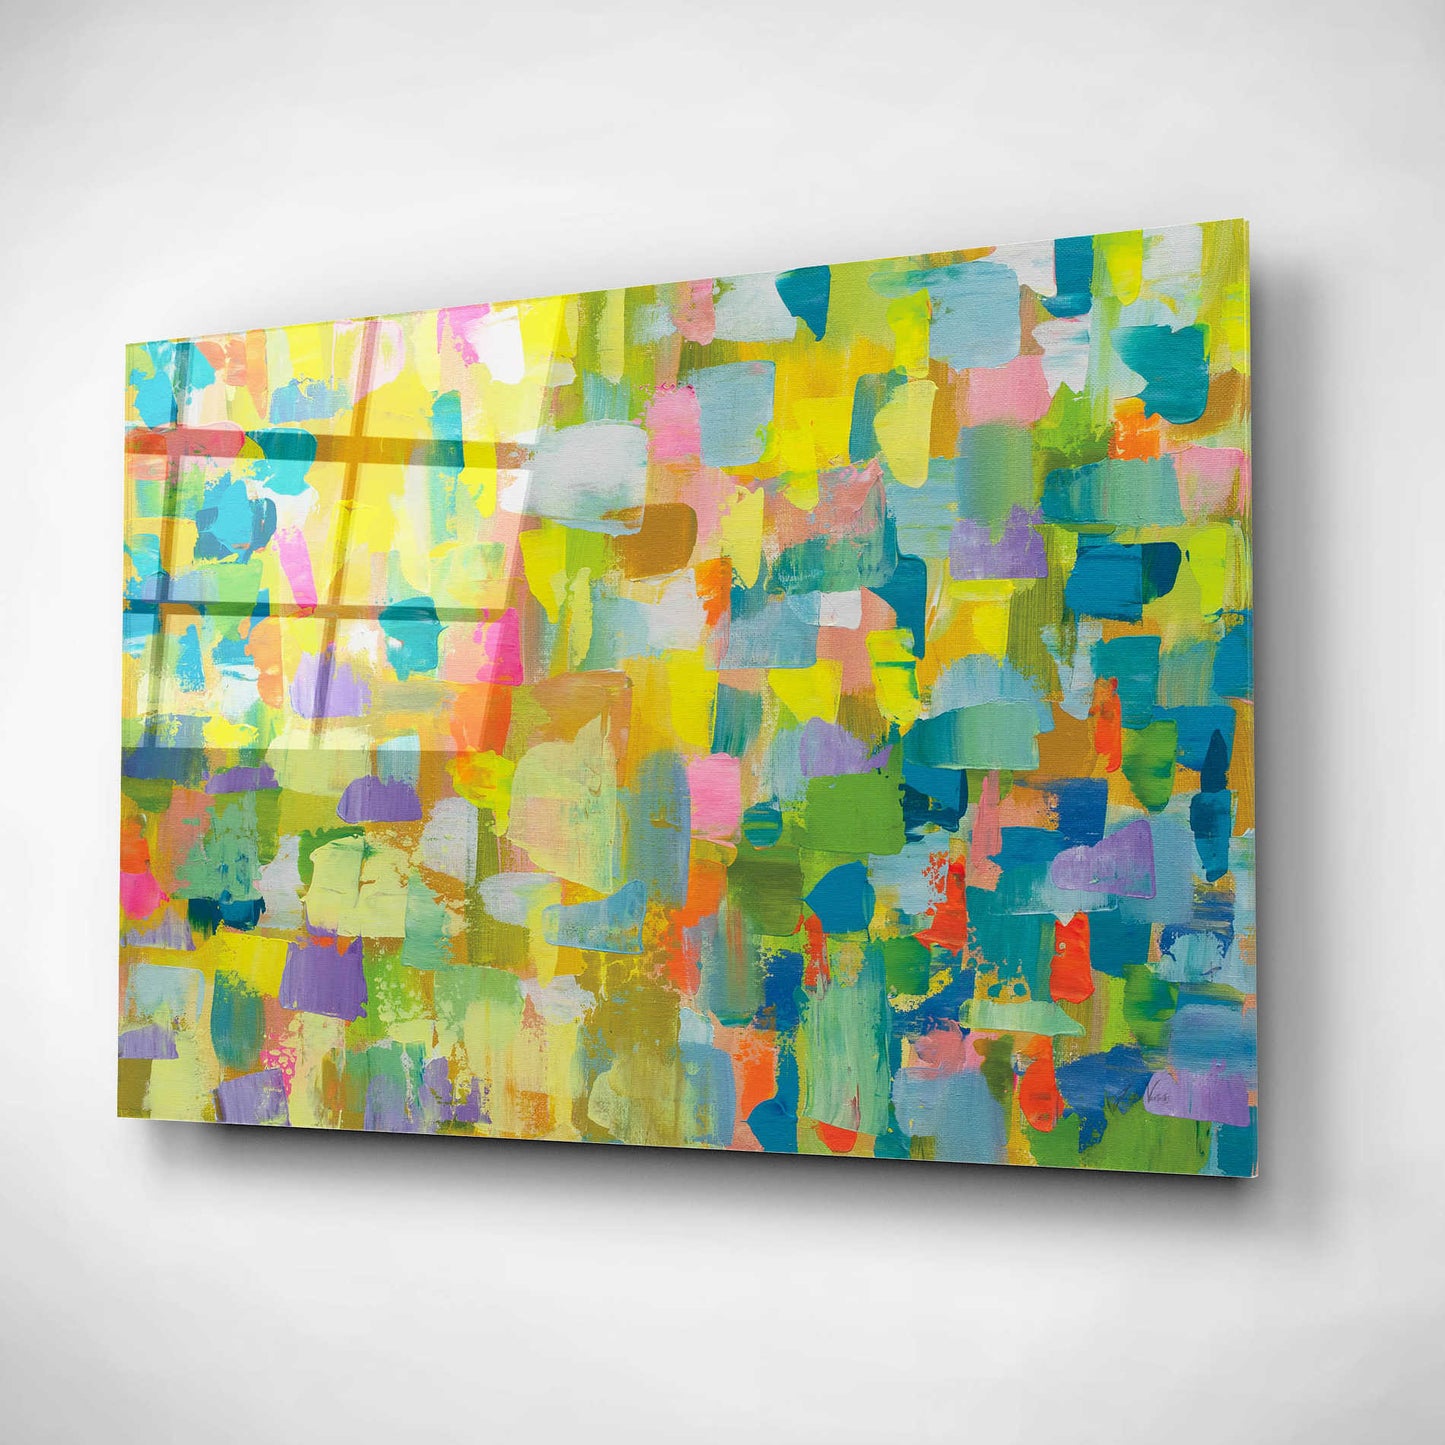 Epic Art 'Merrymaking' by Jeanette Vertentes, Acrylic Glass Wall Art,16x12